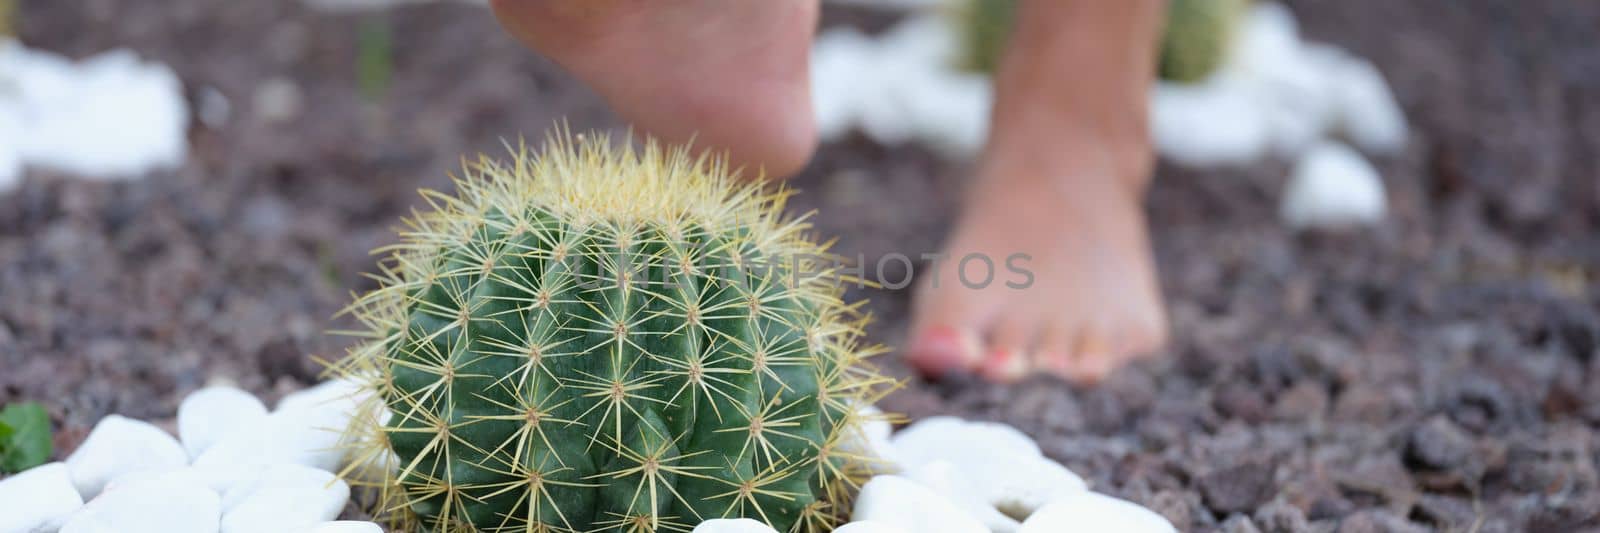 Human leg with painful heel and cactus thorns pierce a woman leg. Leg health and foot pain concept